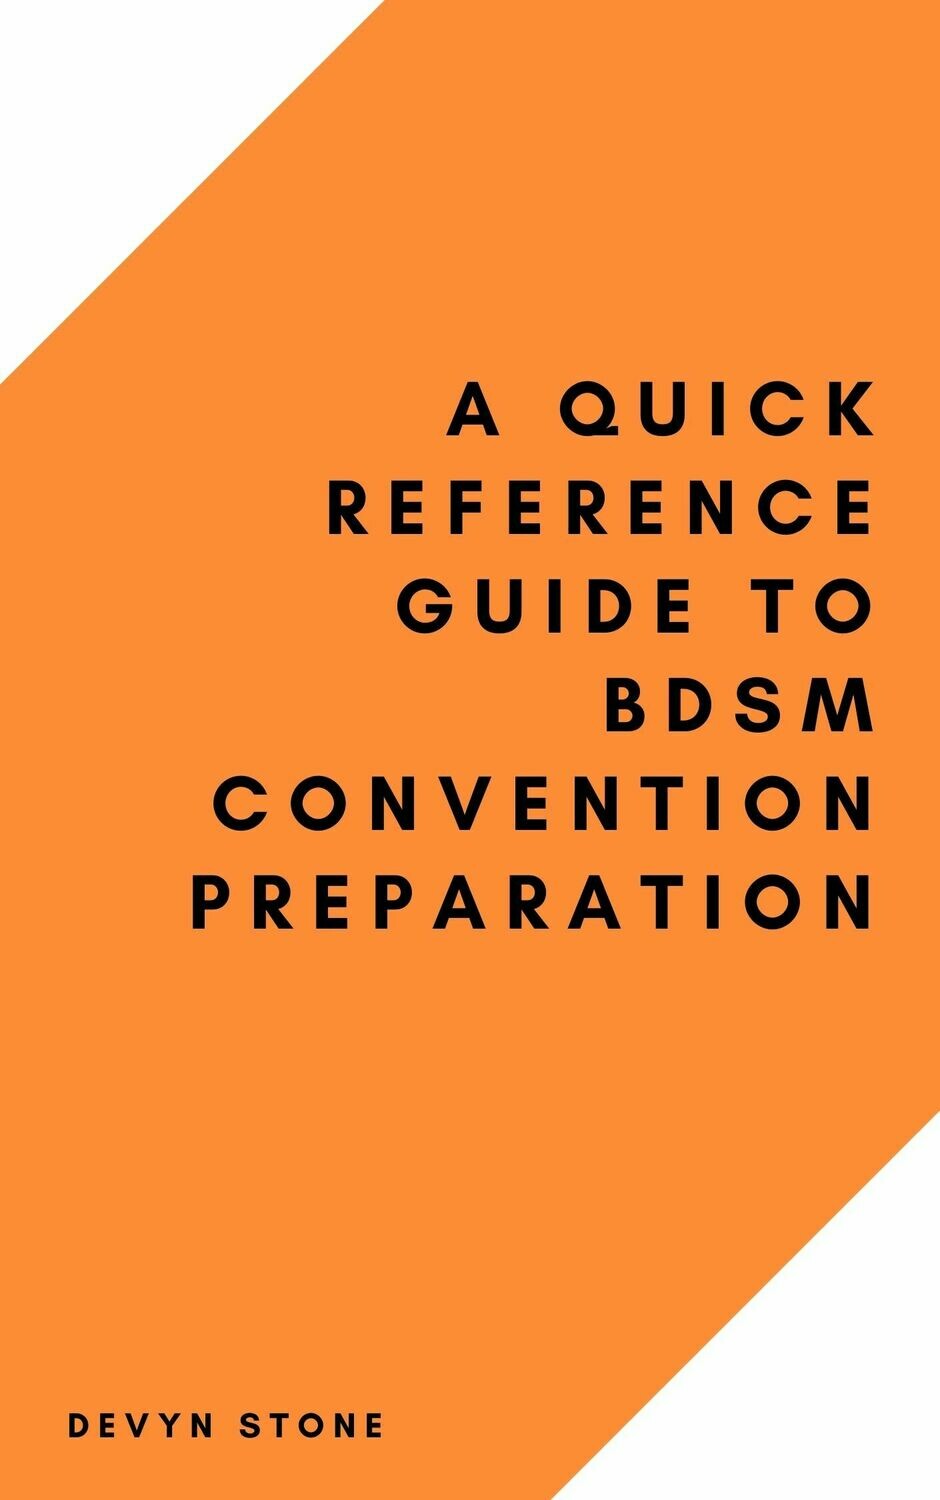 A Quick Reference Guide To BDSM Convention Preparation - Ebook